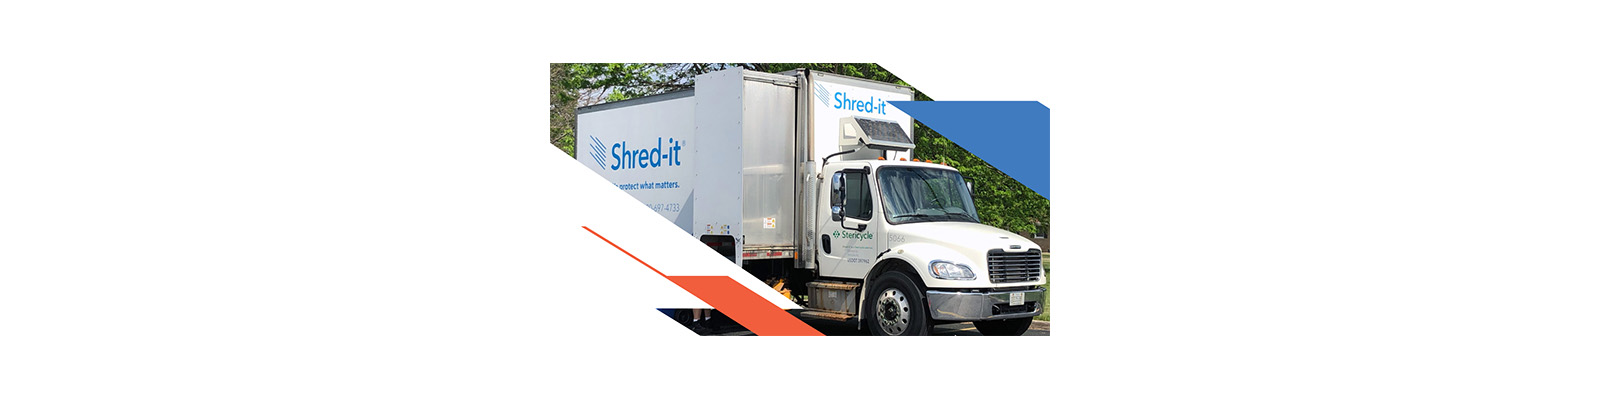 Paper Shred Event